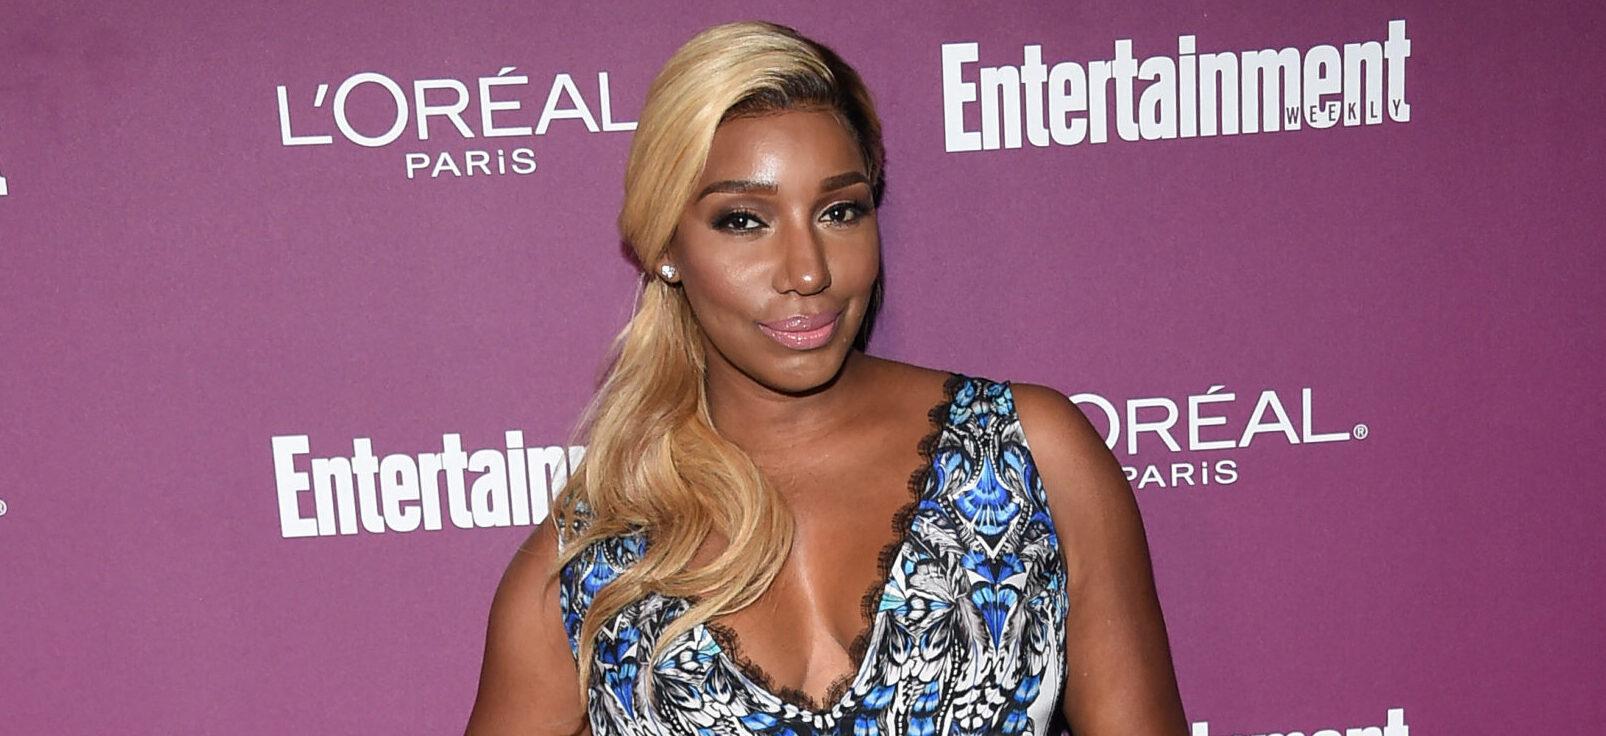 NeNe Leakes On Son Bryson’s Arrest For Drug Possession: ‘He Has An Addiction, There’s Nothing I Can Do’